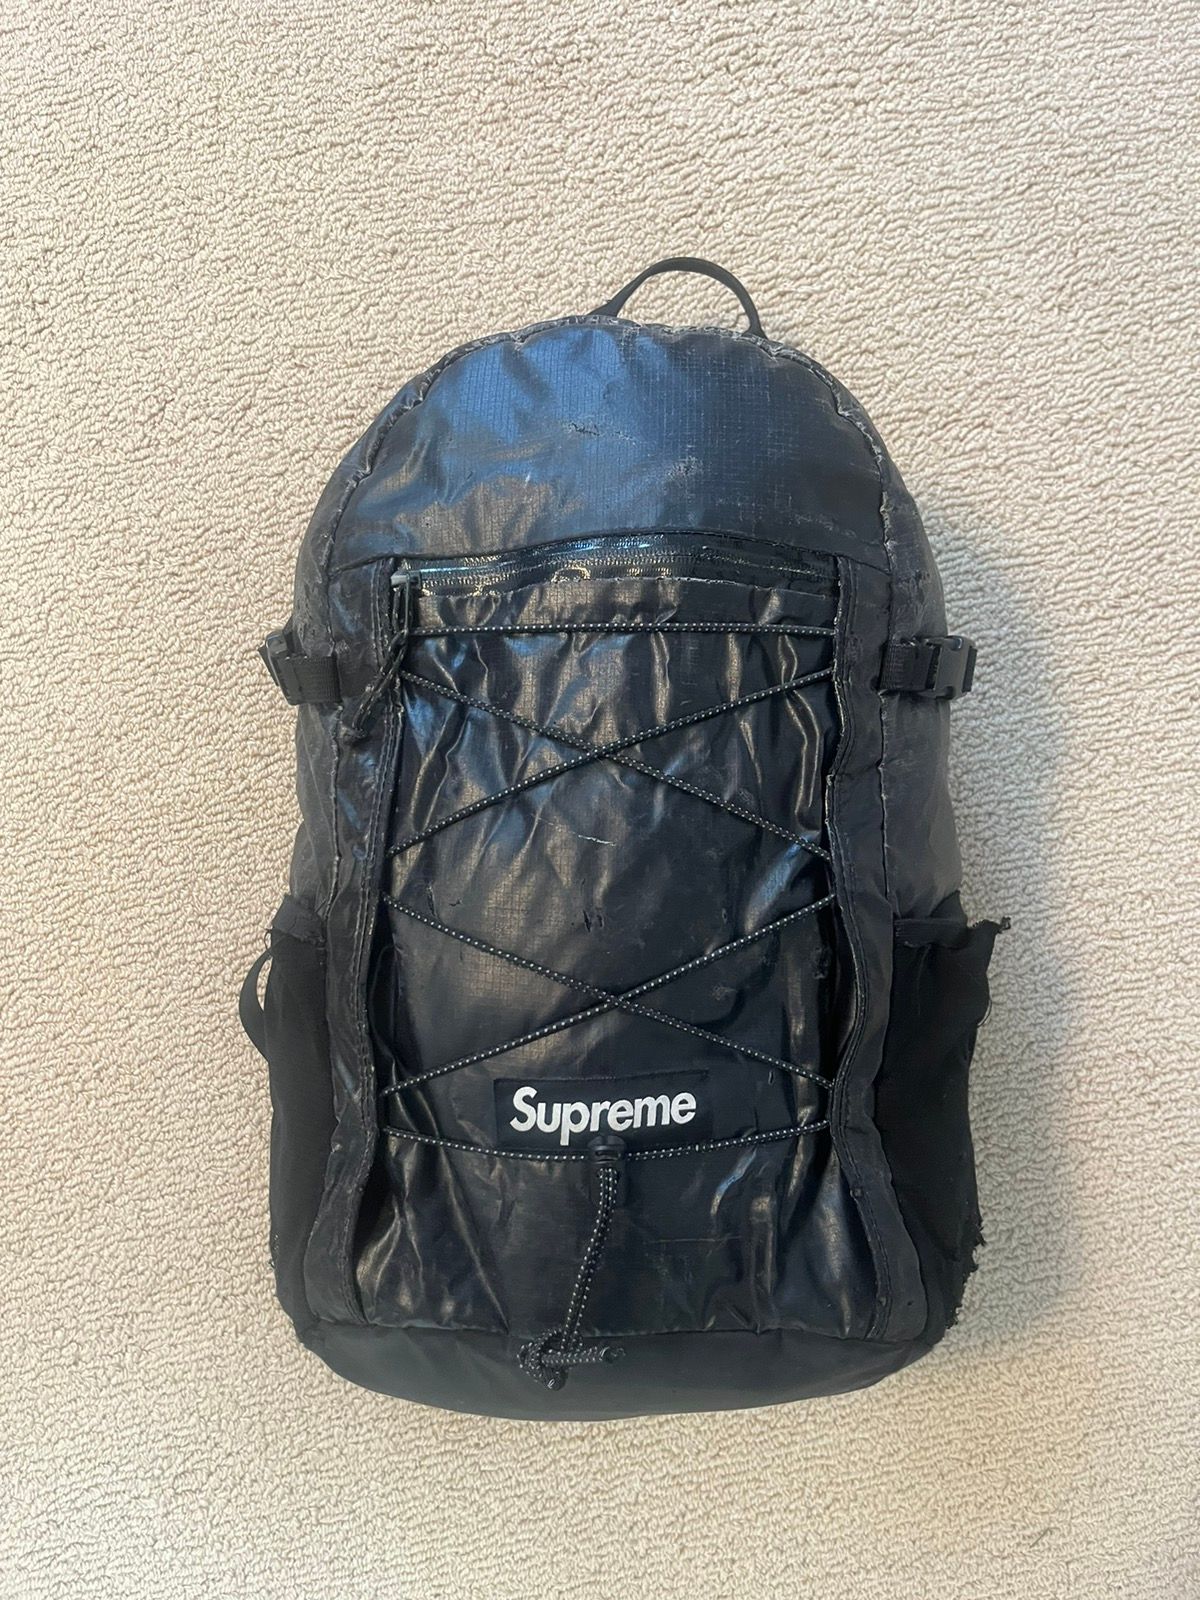 Pre-owned Supreme Backpack Black Fw17